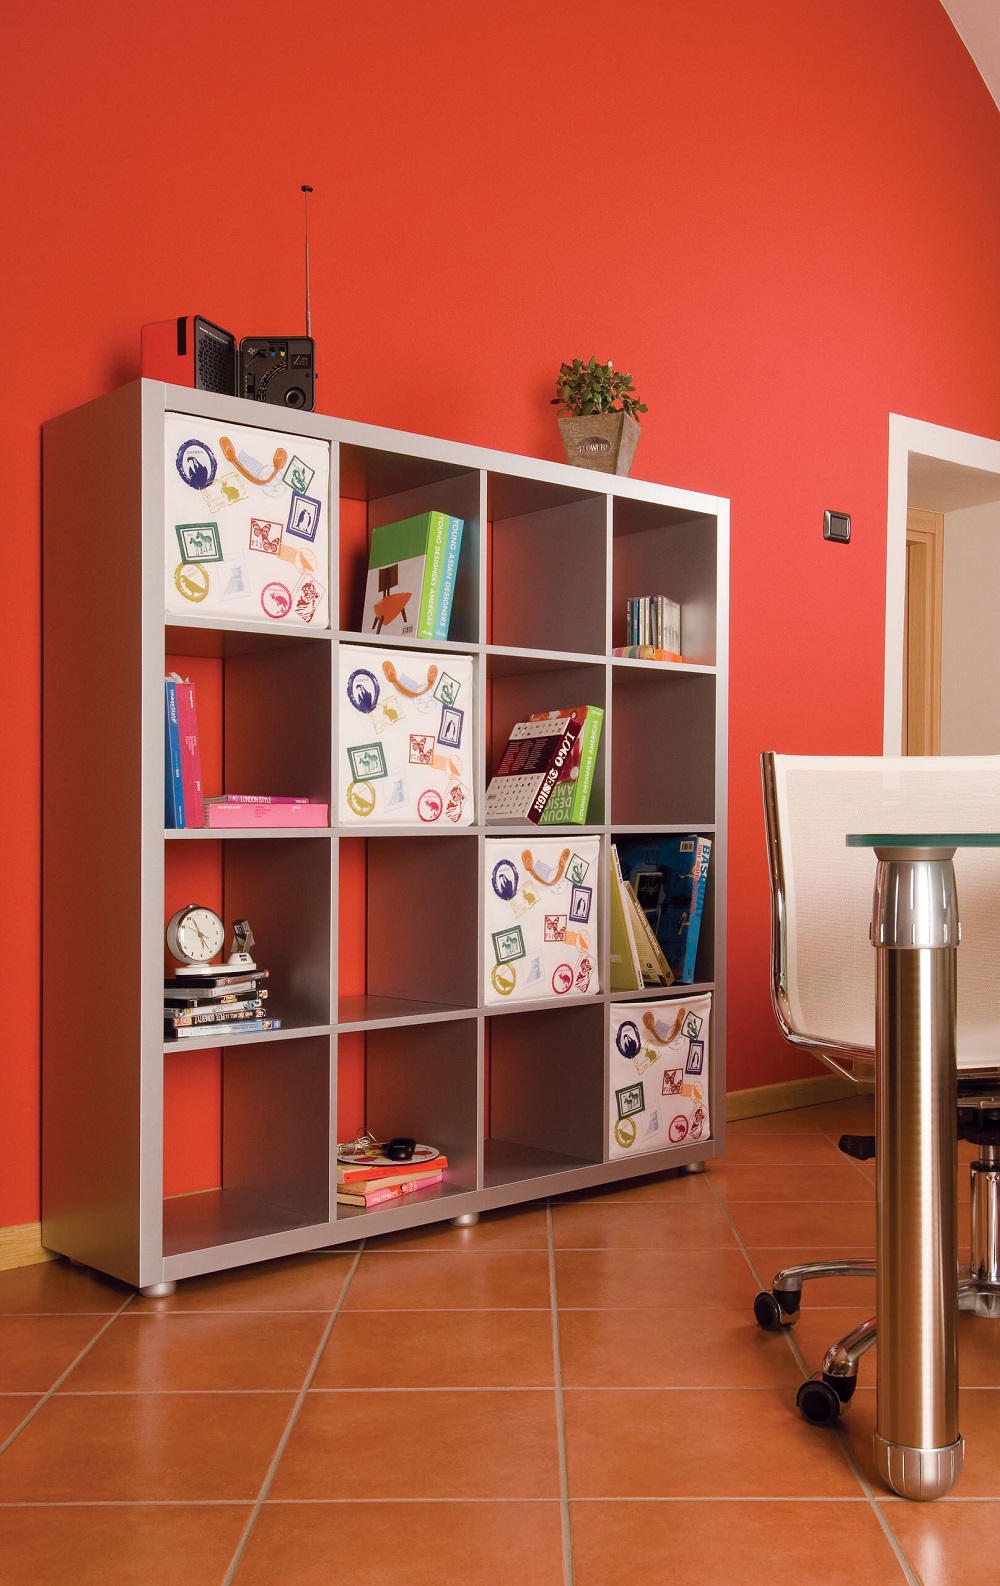 t2-59 Storage ideas in the basement to help you organize your space